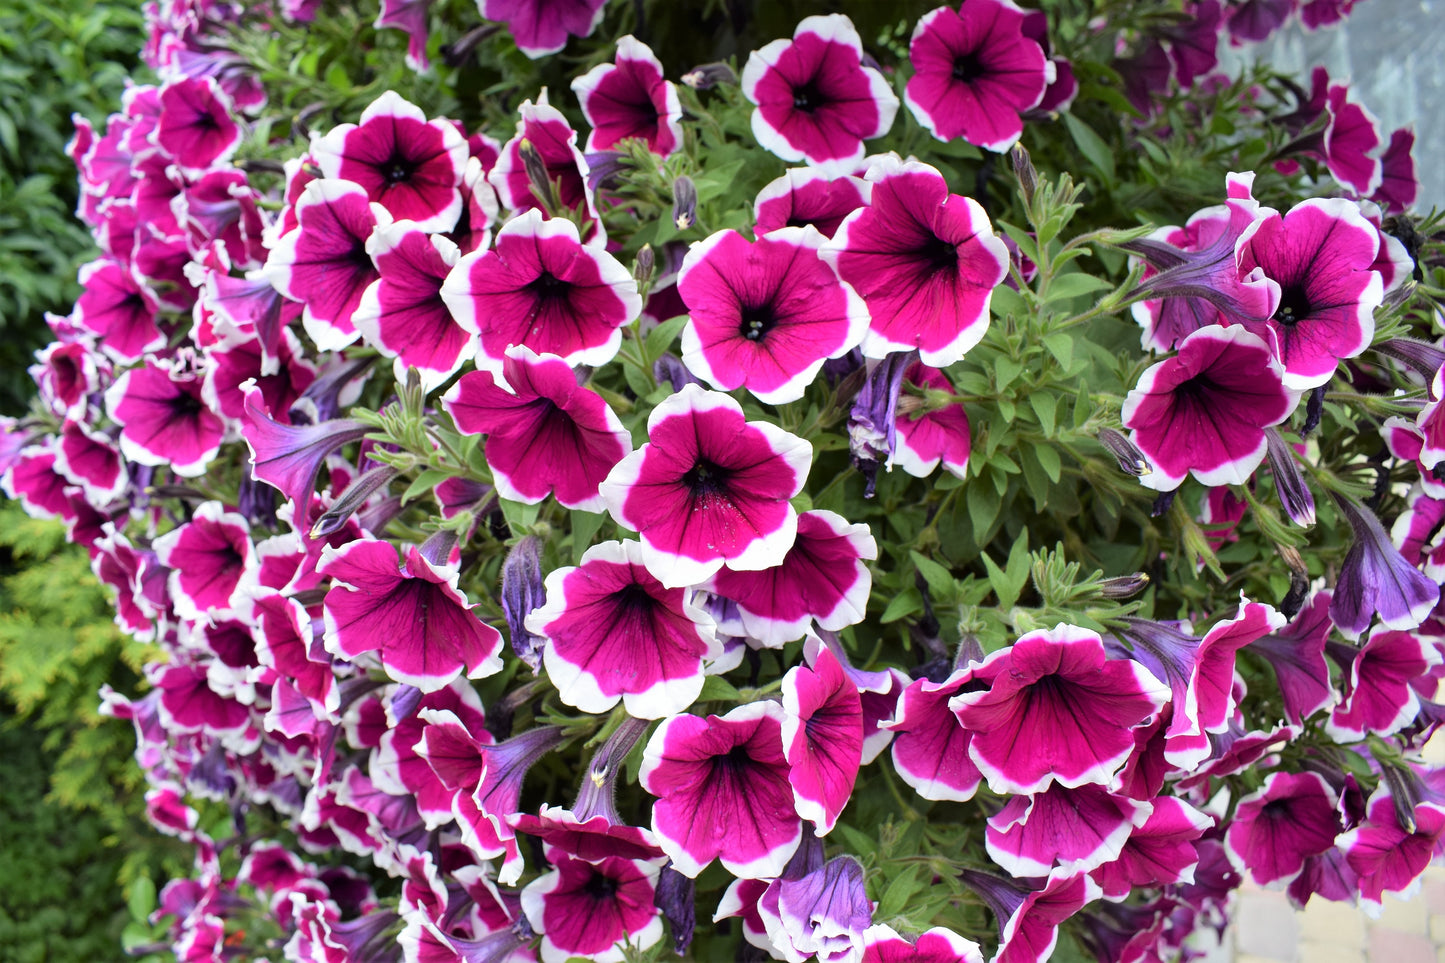 50 PICOTEE MIX PETUNIA Multiflora Mixed Colors Bicolor White Blue Purple Pink Red Flower Seeds